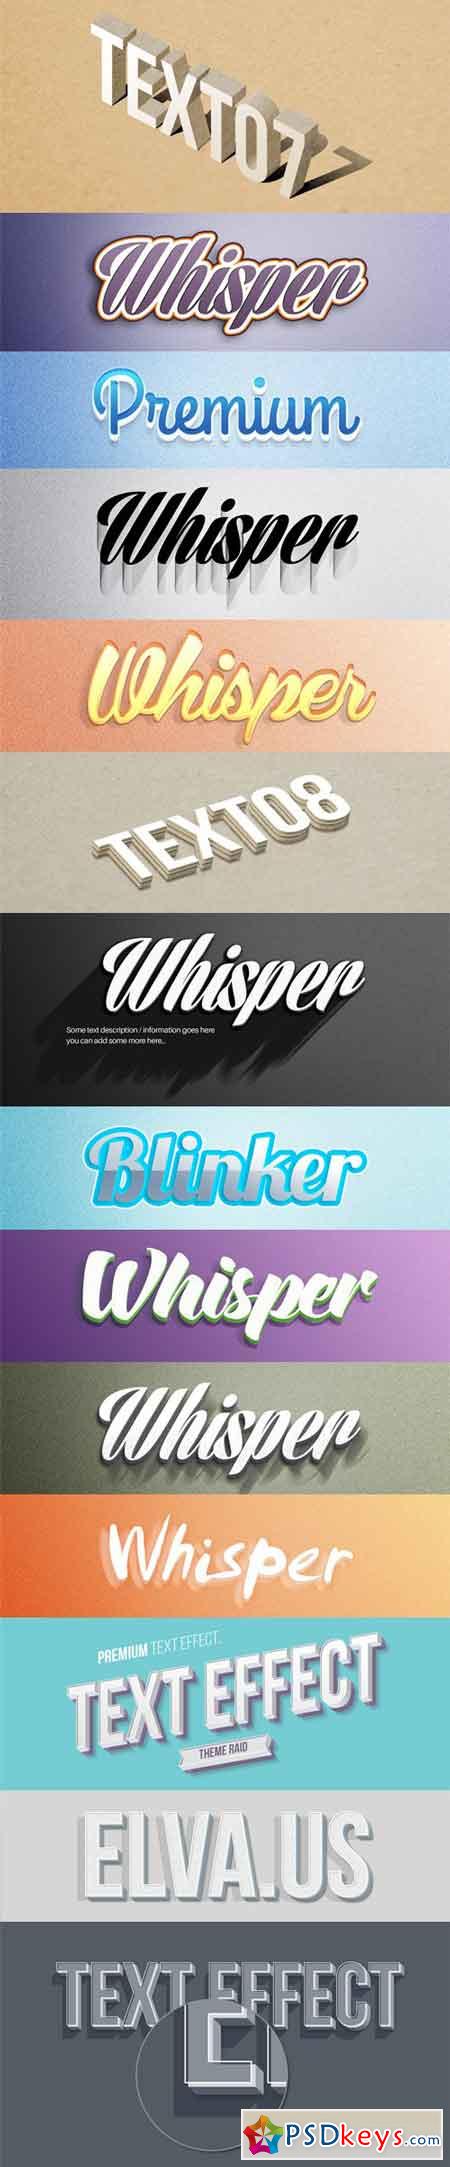 3D Text Effects PSD With Shadows